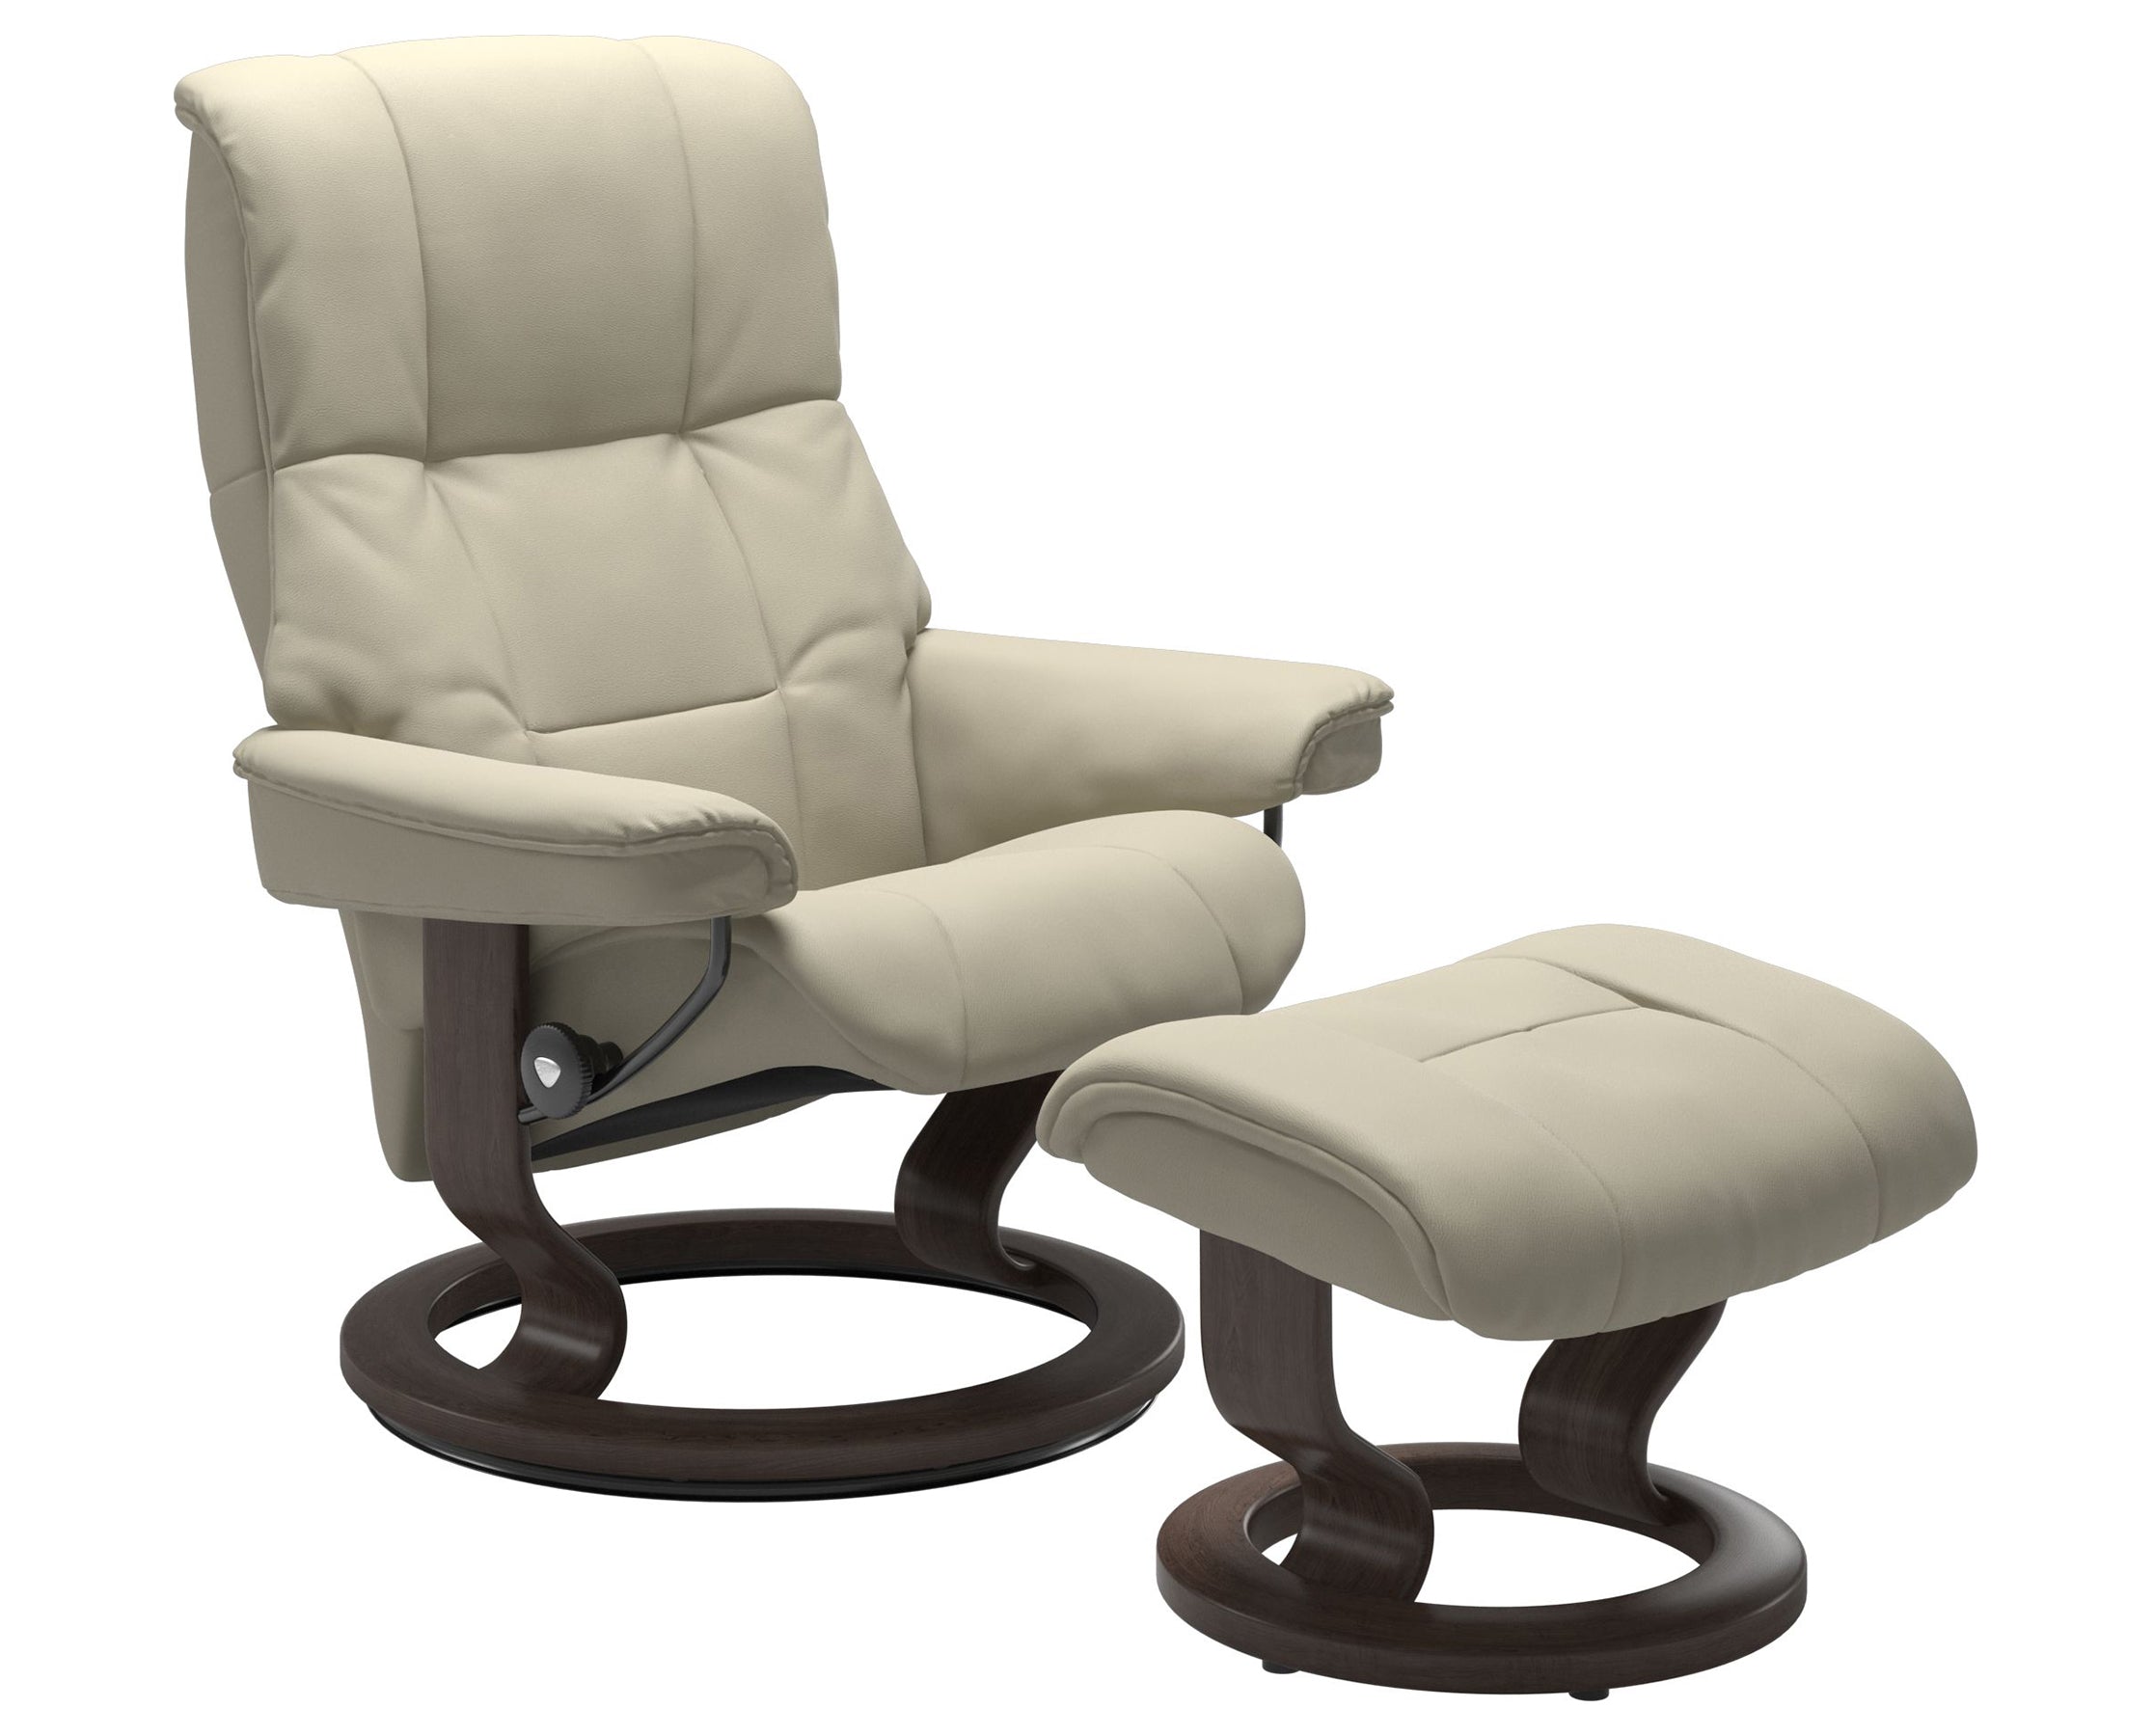 Paloma Leather Light Grey S/M/L and Wenge Base | Stressless Mayfair Classic Recliner | Valley Ridge Furniture